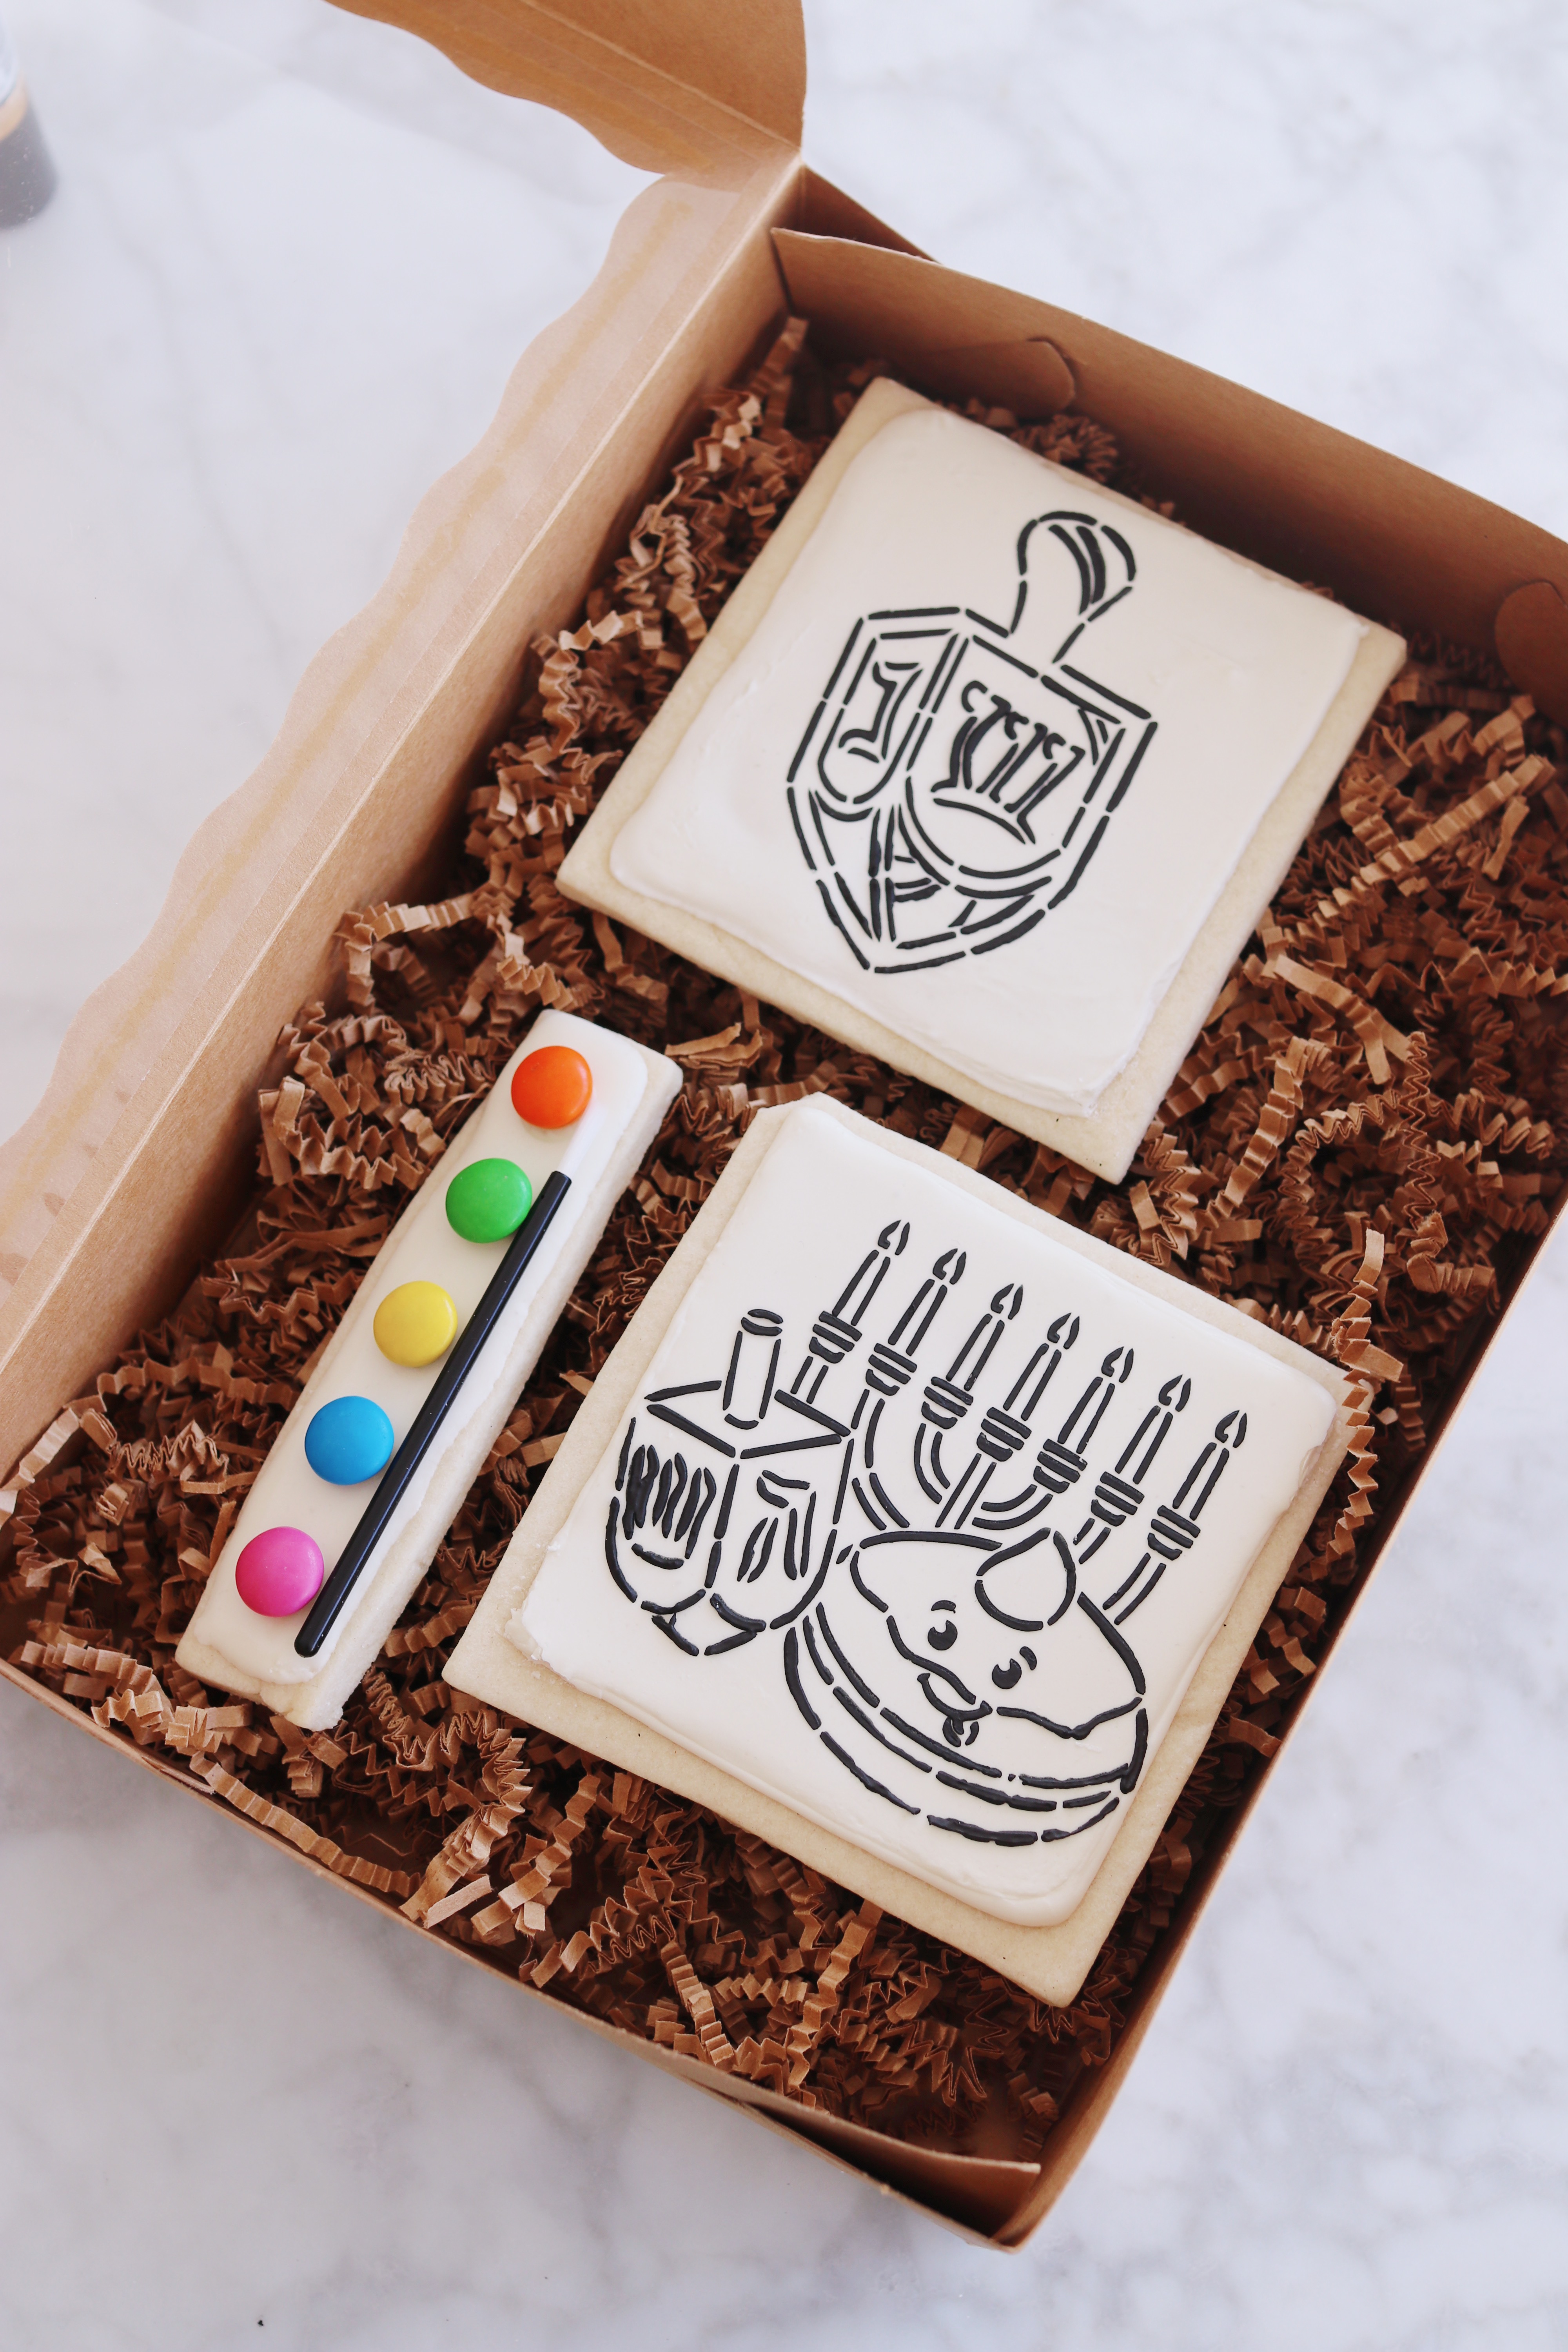 PYO (Paint-Your-Own) Cookies for Hanukkah